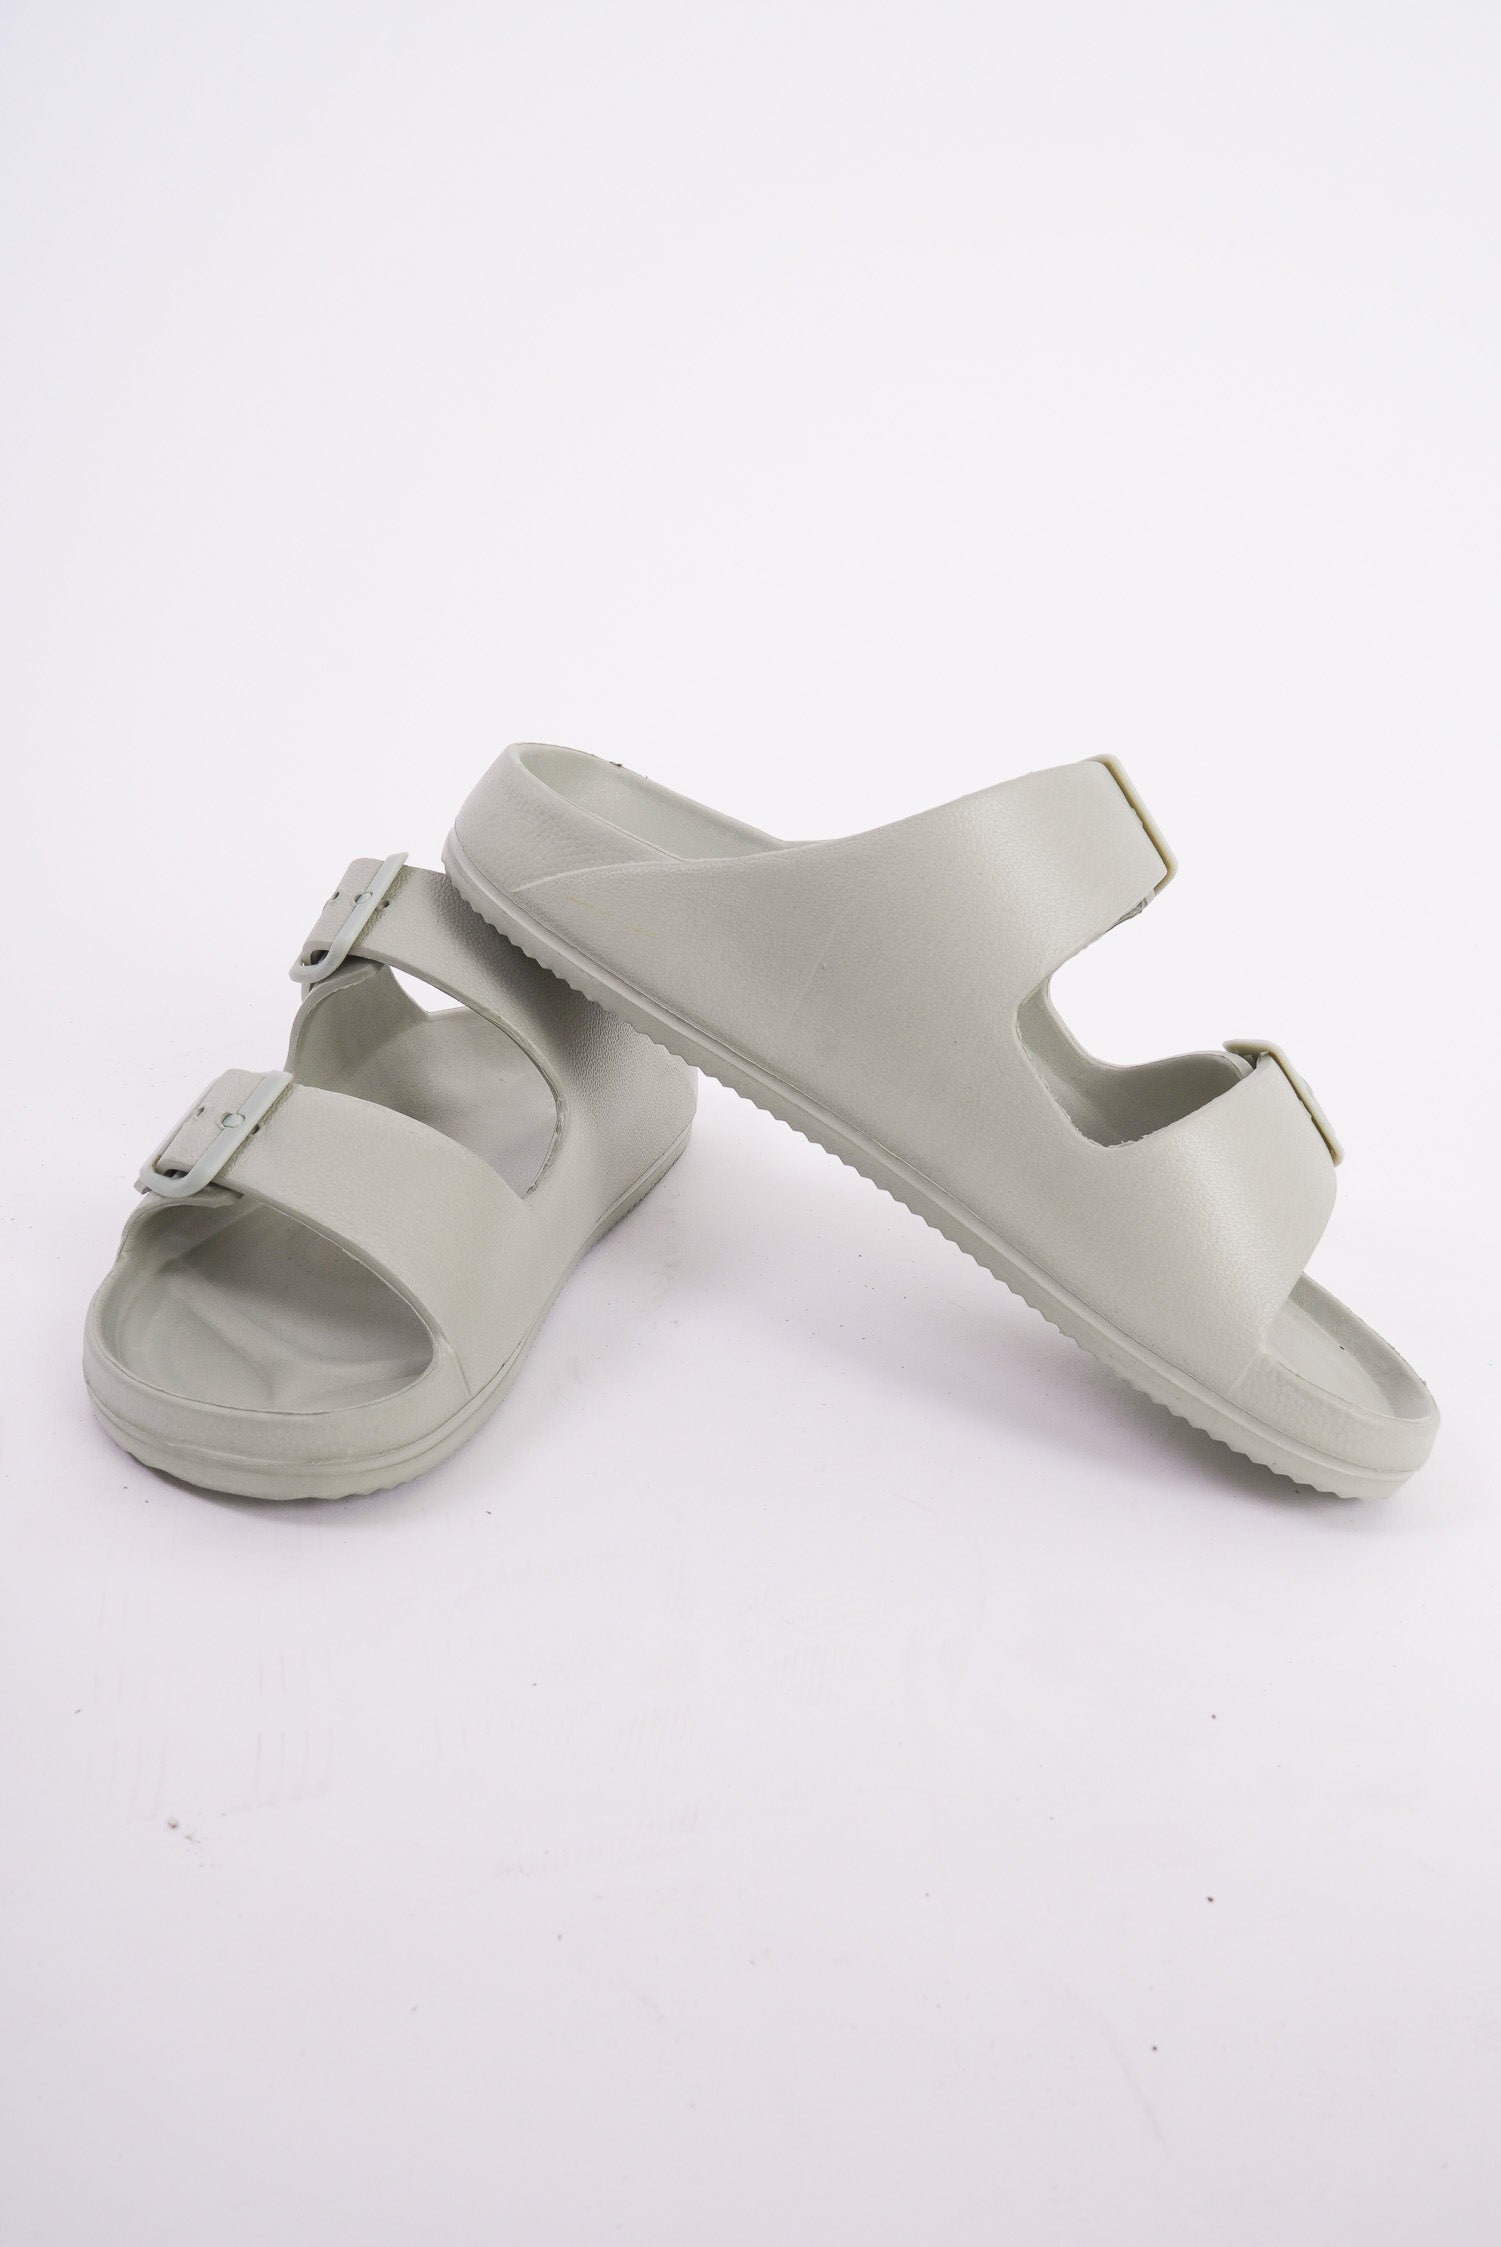 A pair of Birkenstock style sandals that are a sage green color. They have two adjustable straps that go across the top of the foot, are lightweight and are waterproof. 